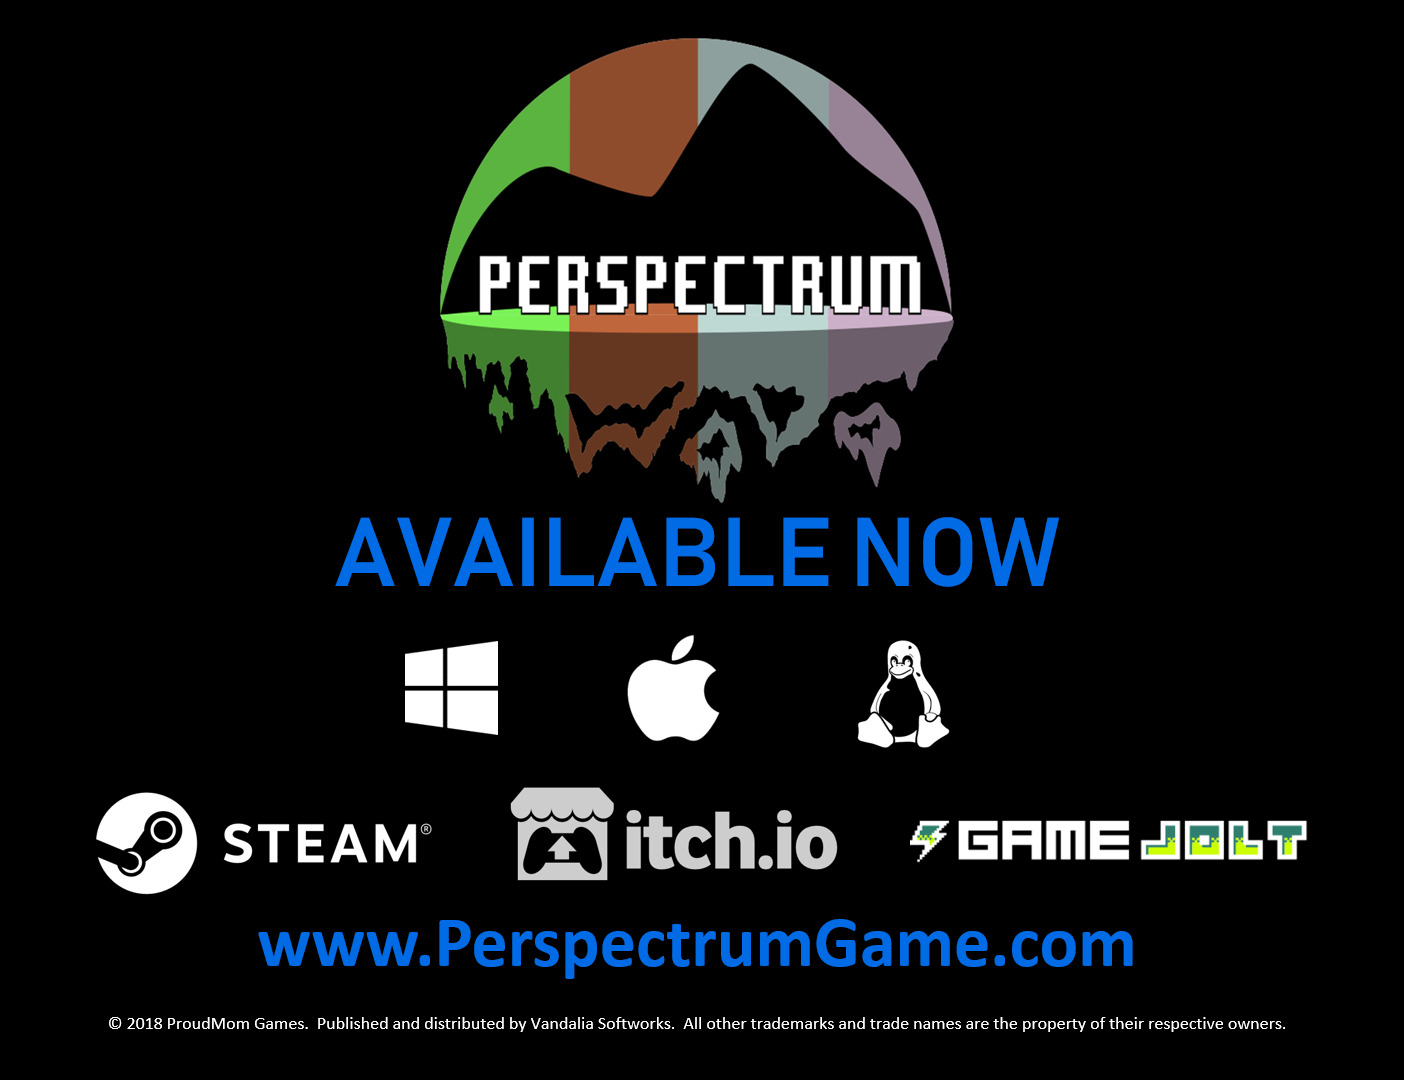 Perspectrum Available Now